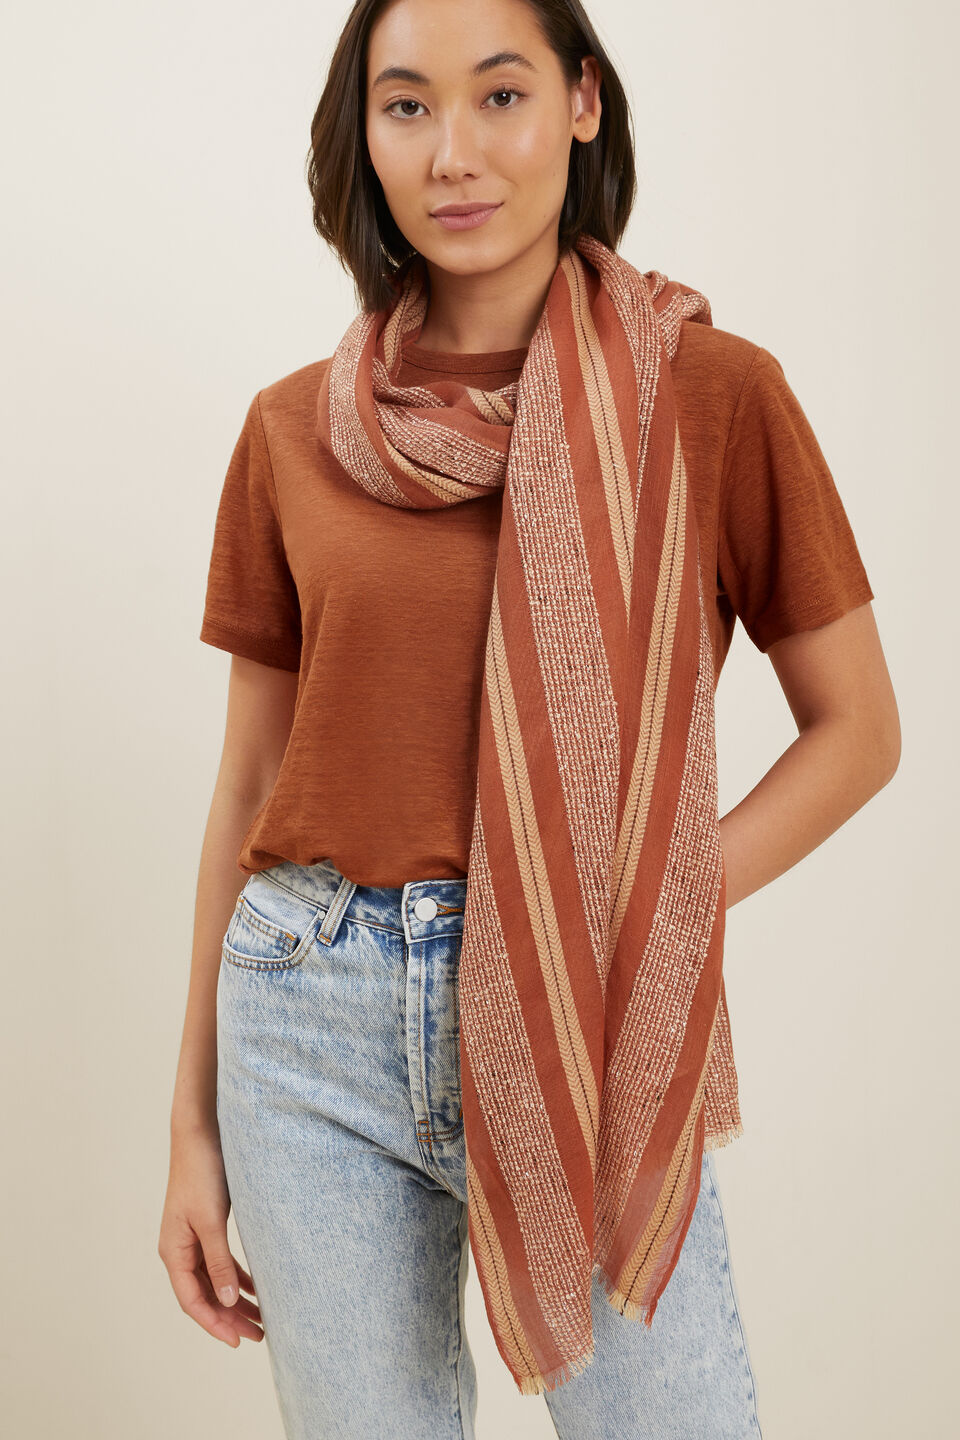 Textured Weave Scarf  Earth Red Multi